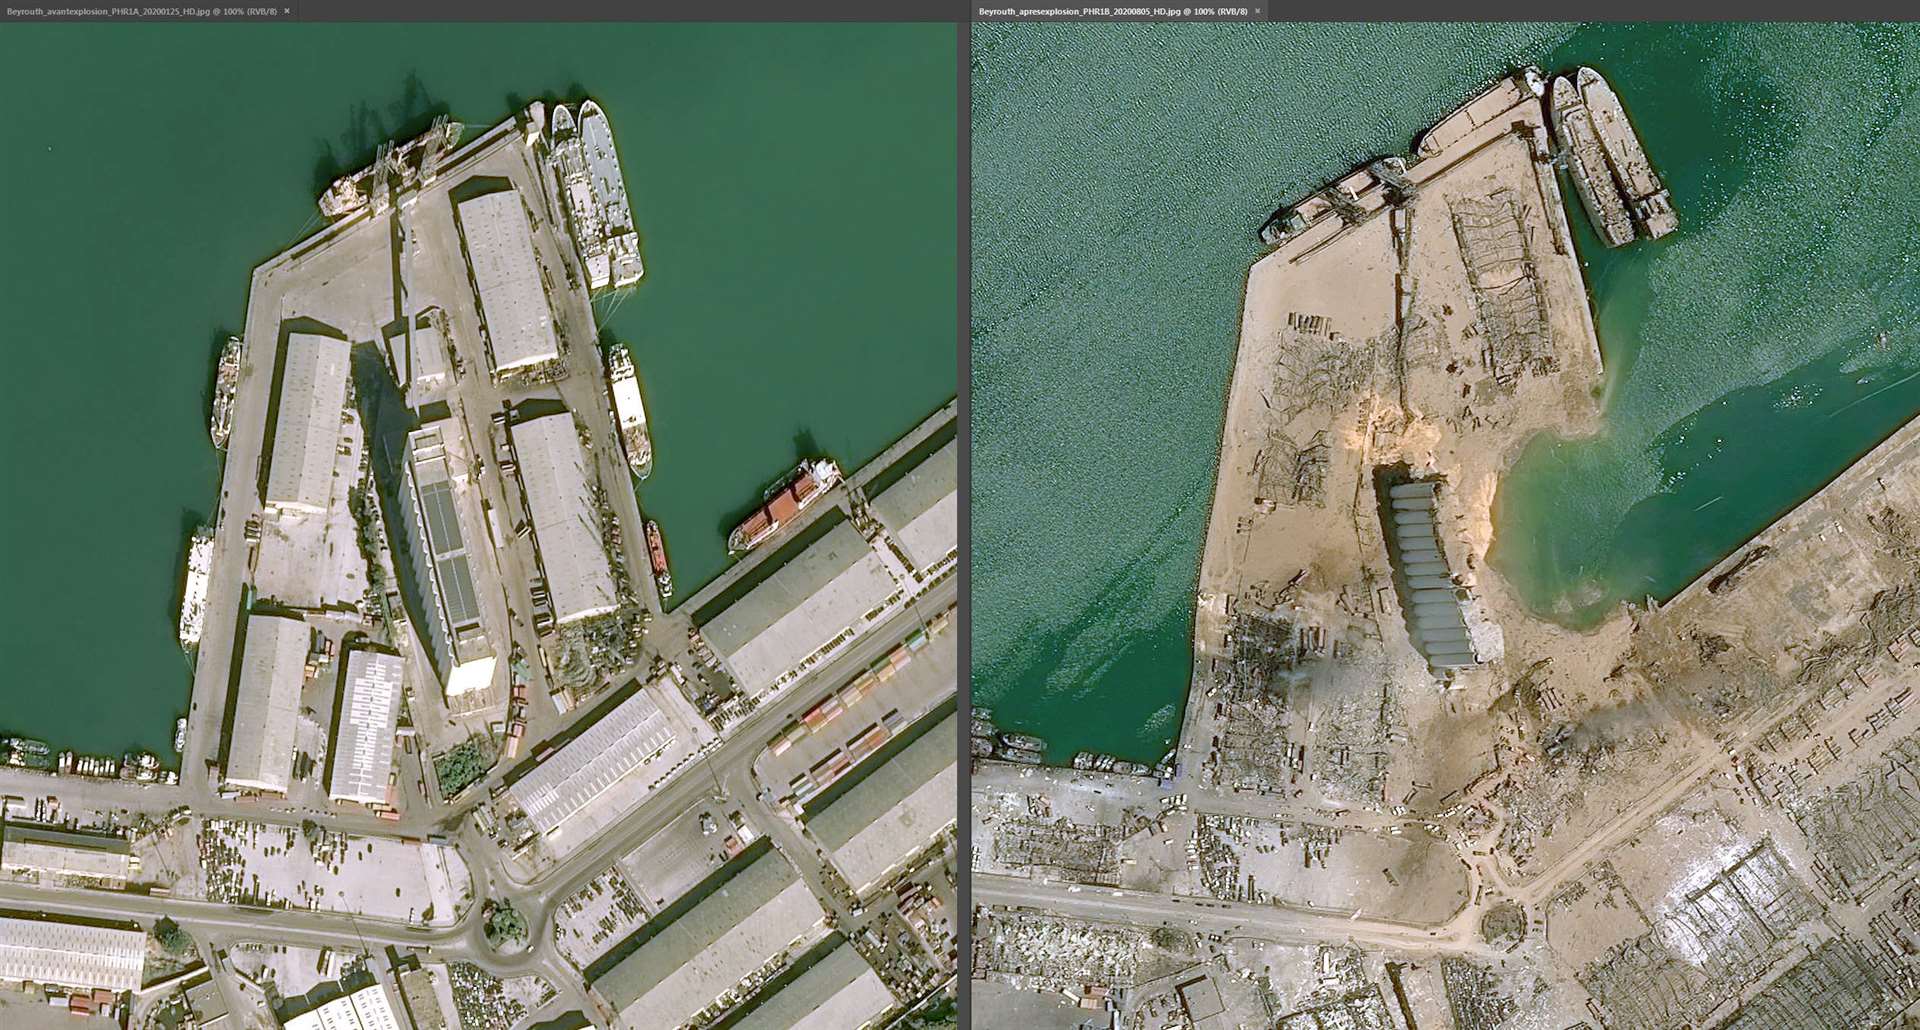 The docks before and after the huge blast in the Lebanese capita (Copyright (c)Cnes 2020, Distribution Airbus DS/PA)